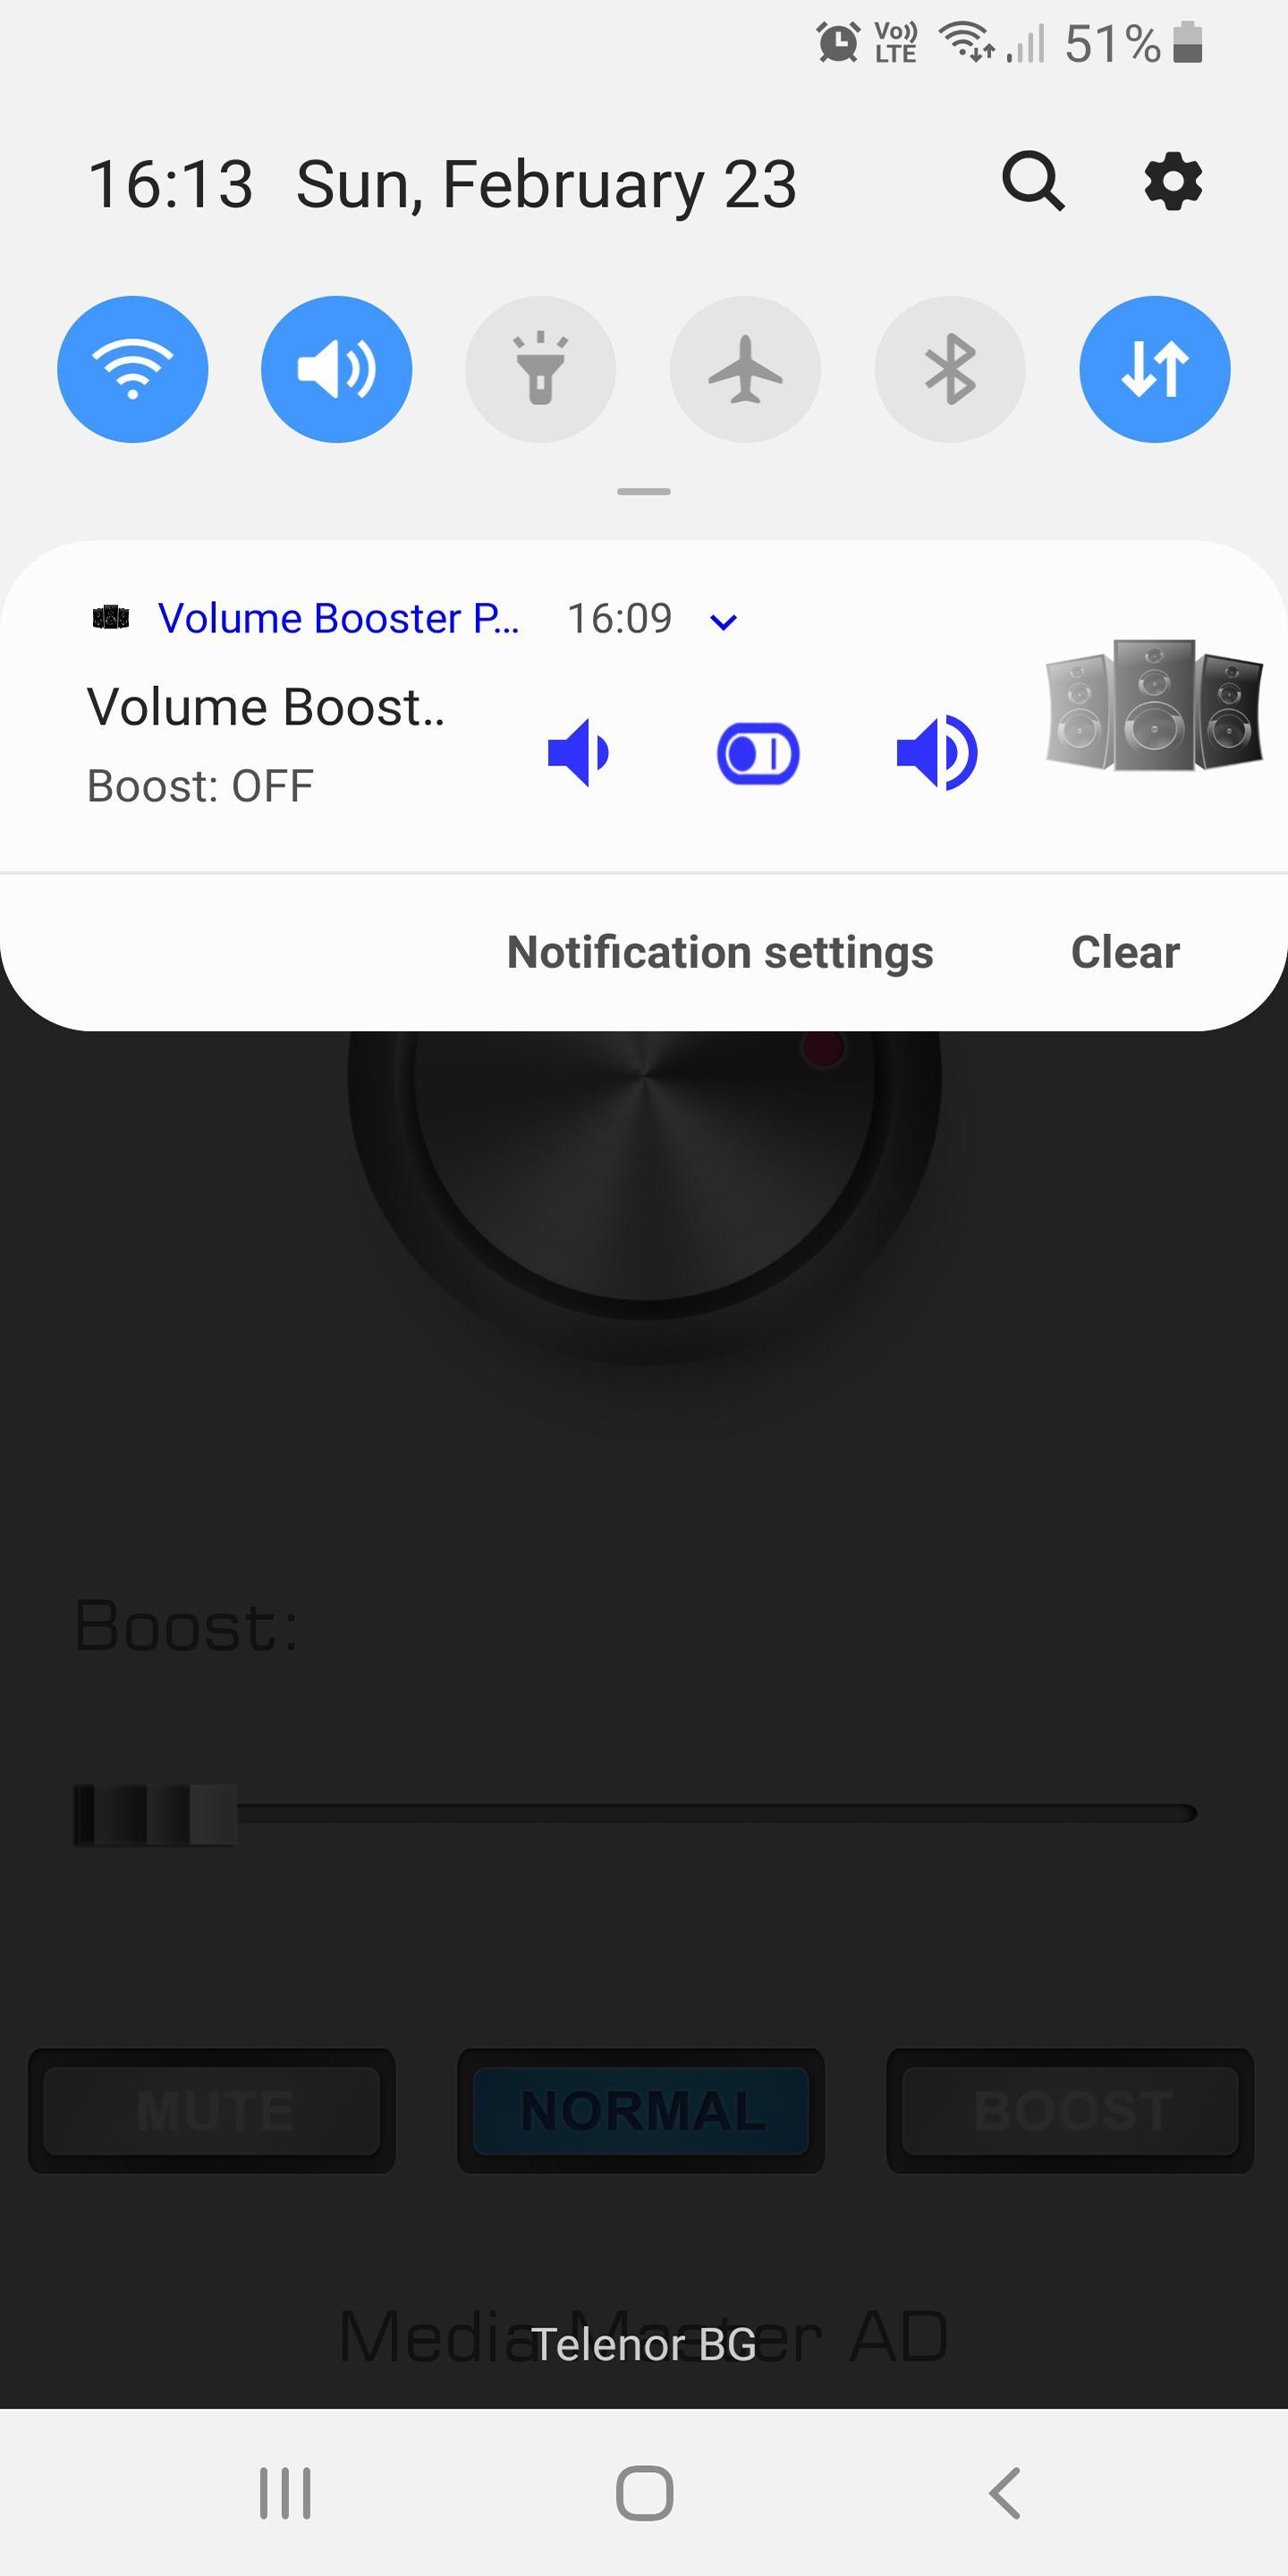 Volume Booster Pro for Android - APK Download